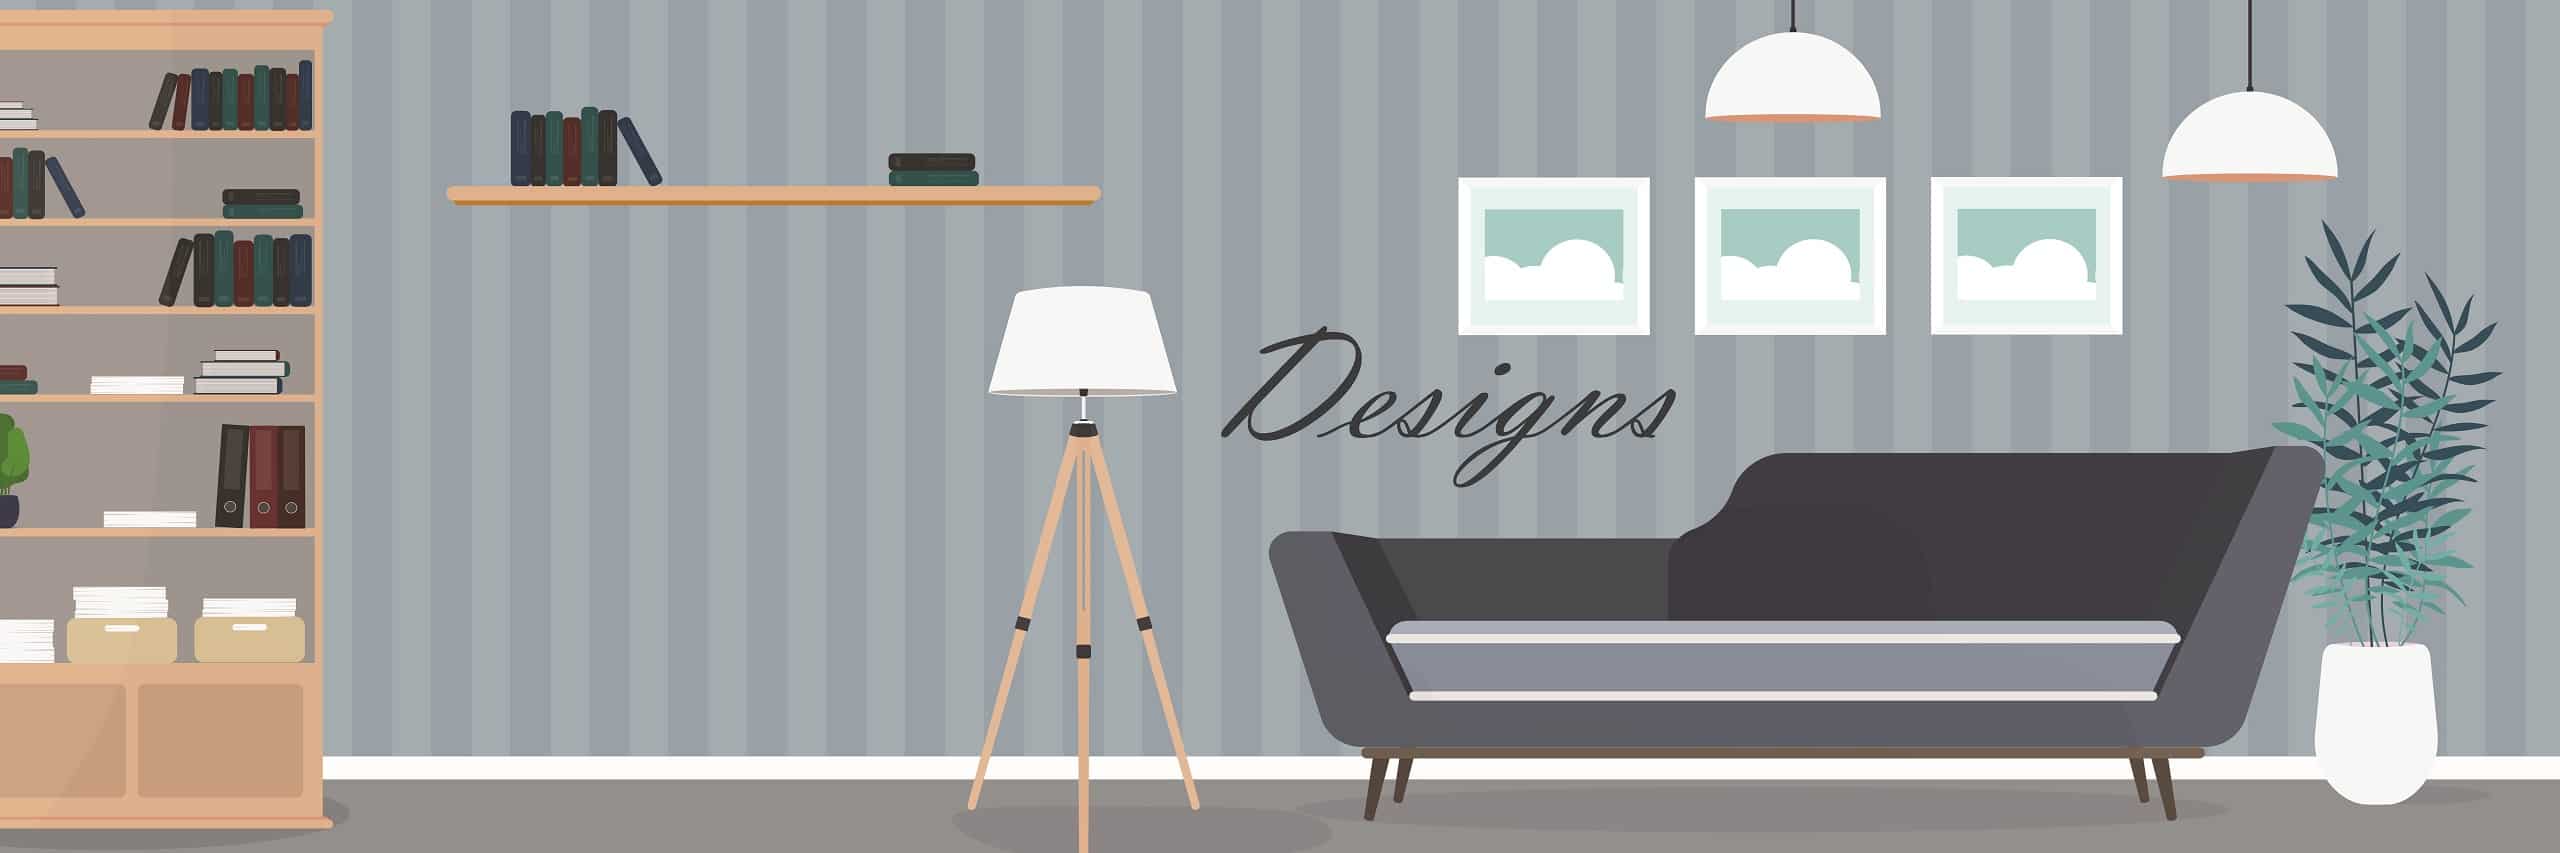 Living room graphical design image